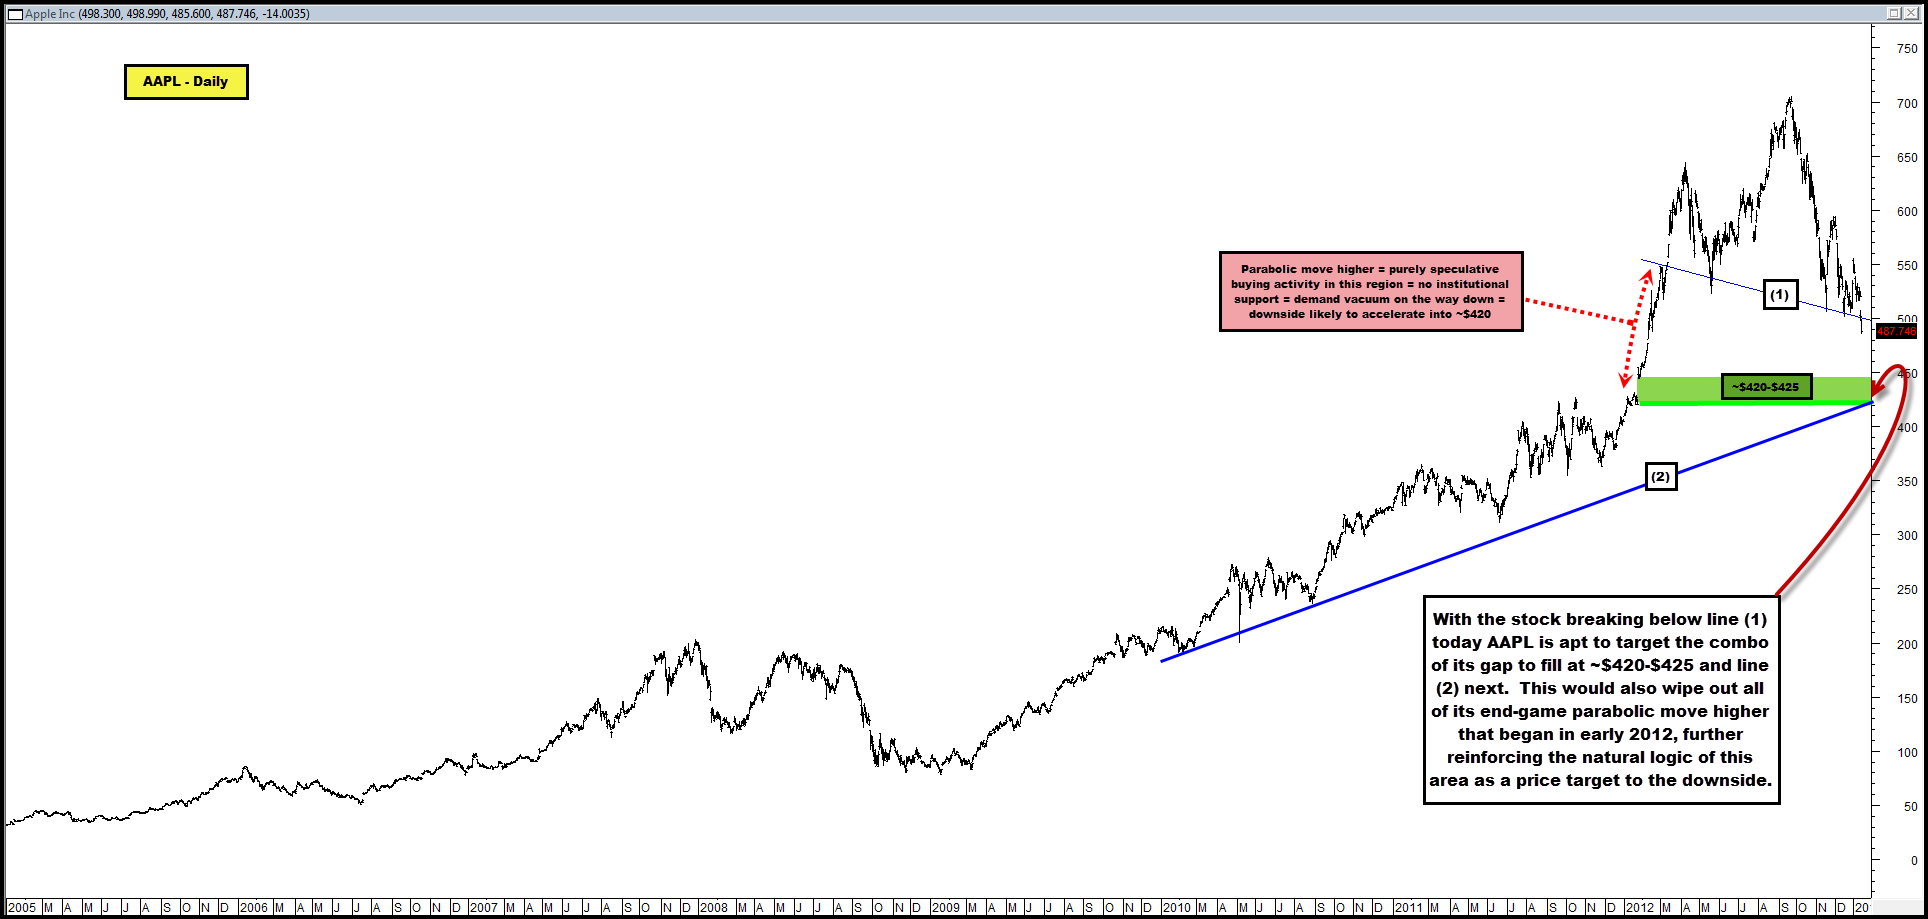 2013-01-15 AAPL - Daily